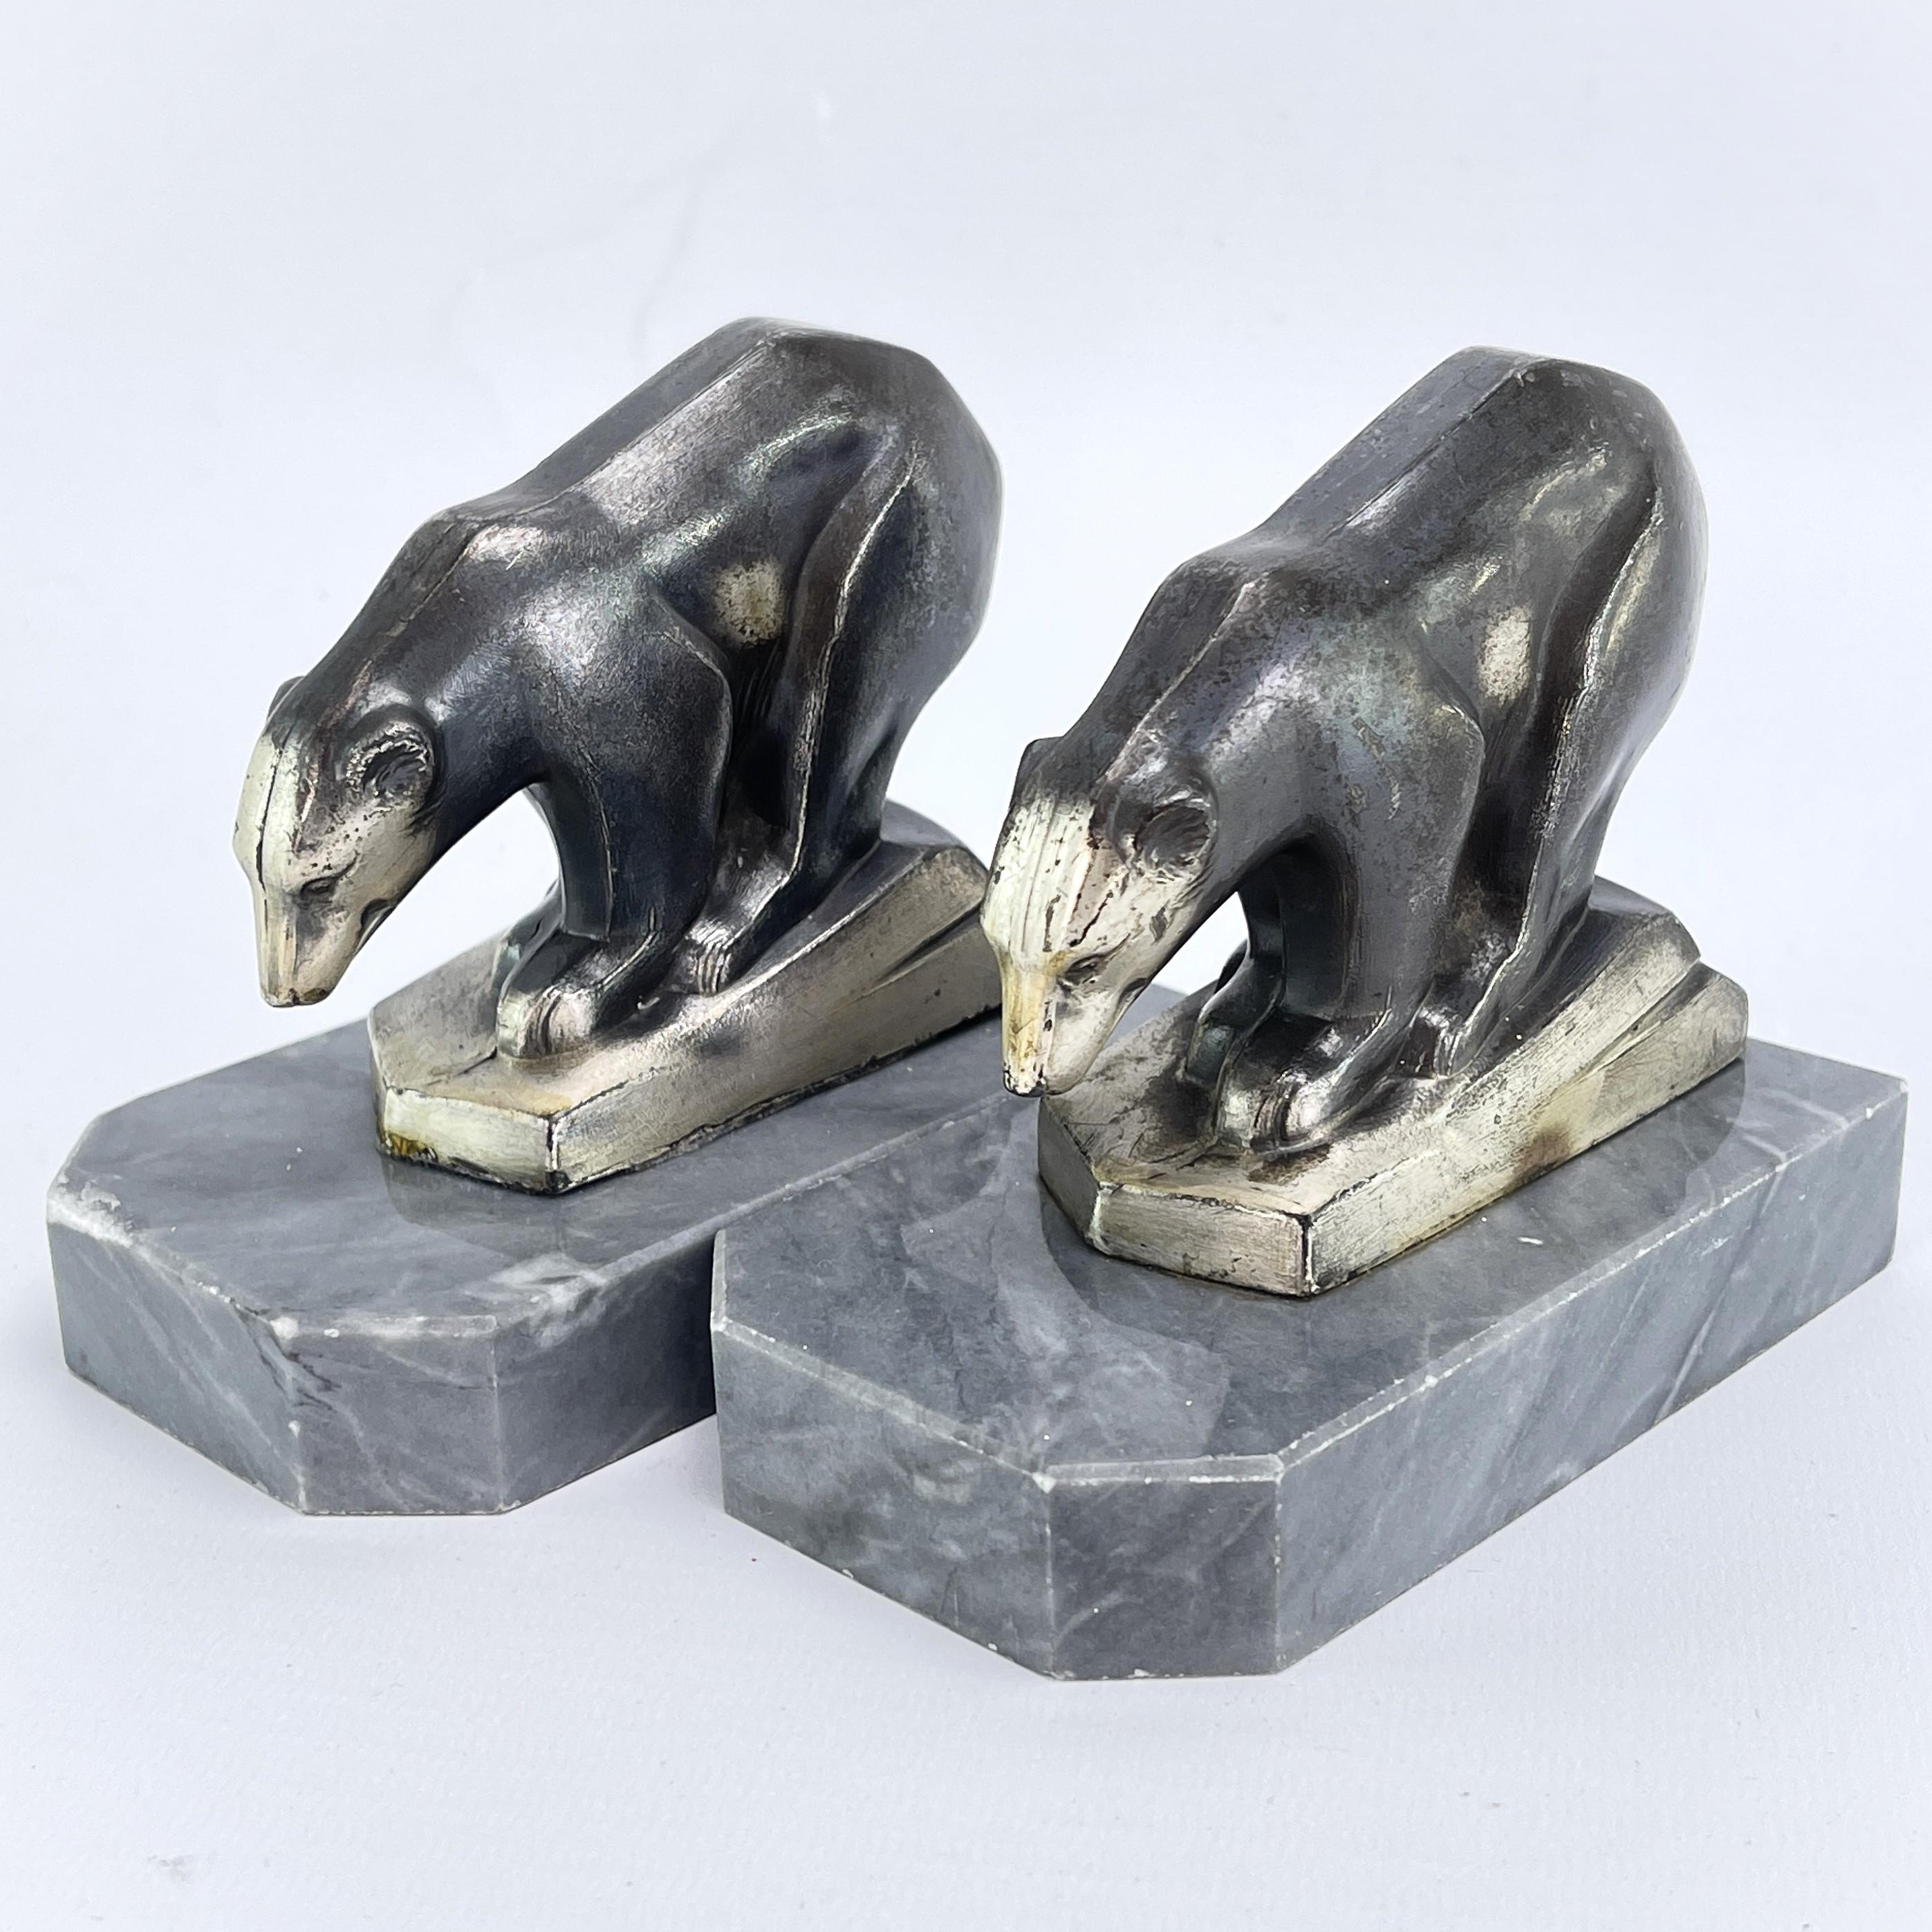 Art Deco polar bears  bookends - 1930s

These beautiful polar bears supports are originals from the 1930s and are typical of the Art Deco period.

Each cleaned item weights 0,8 kg / 1,76 lbs.